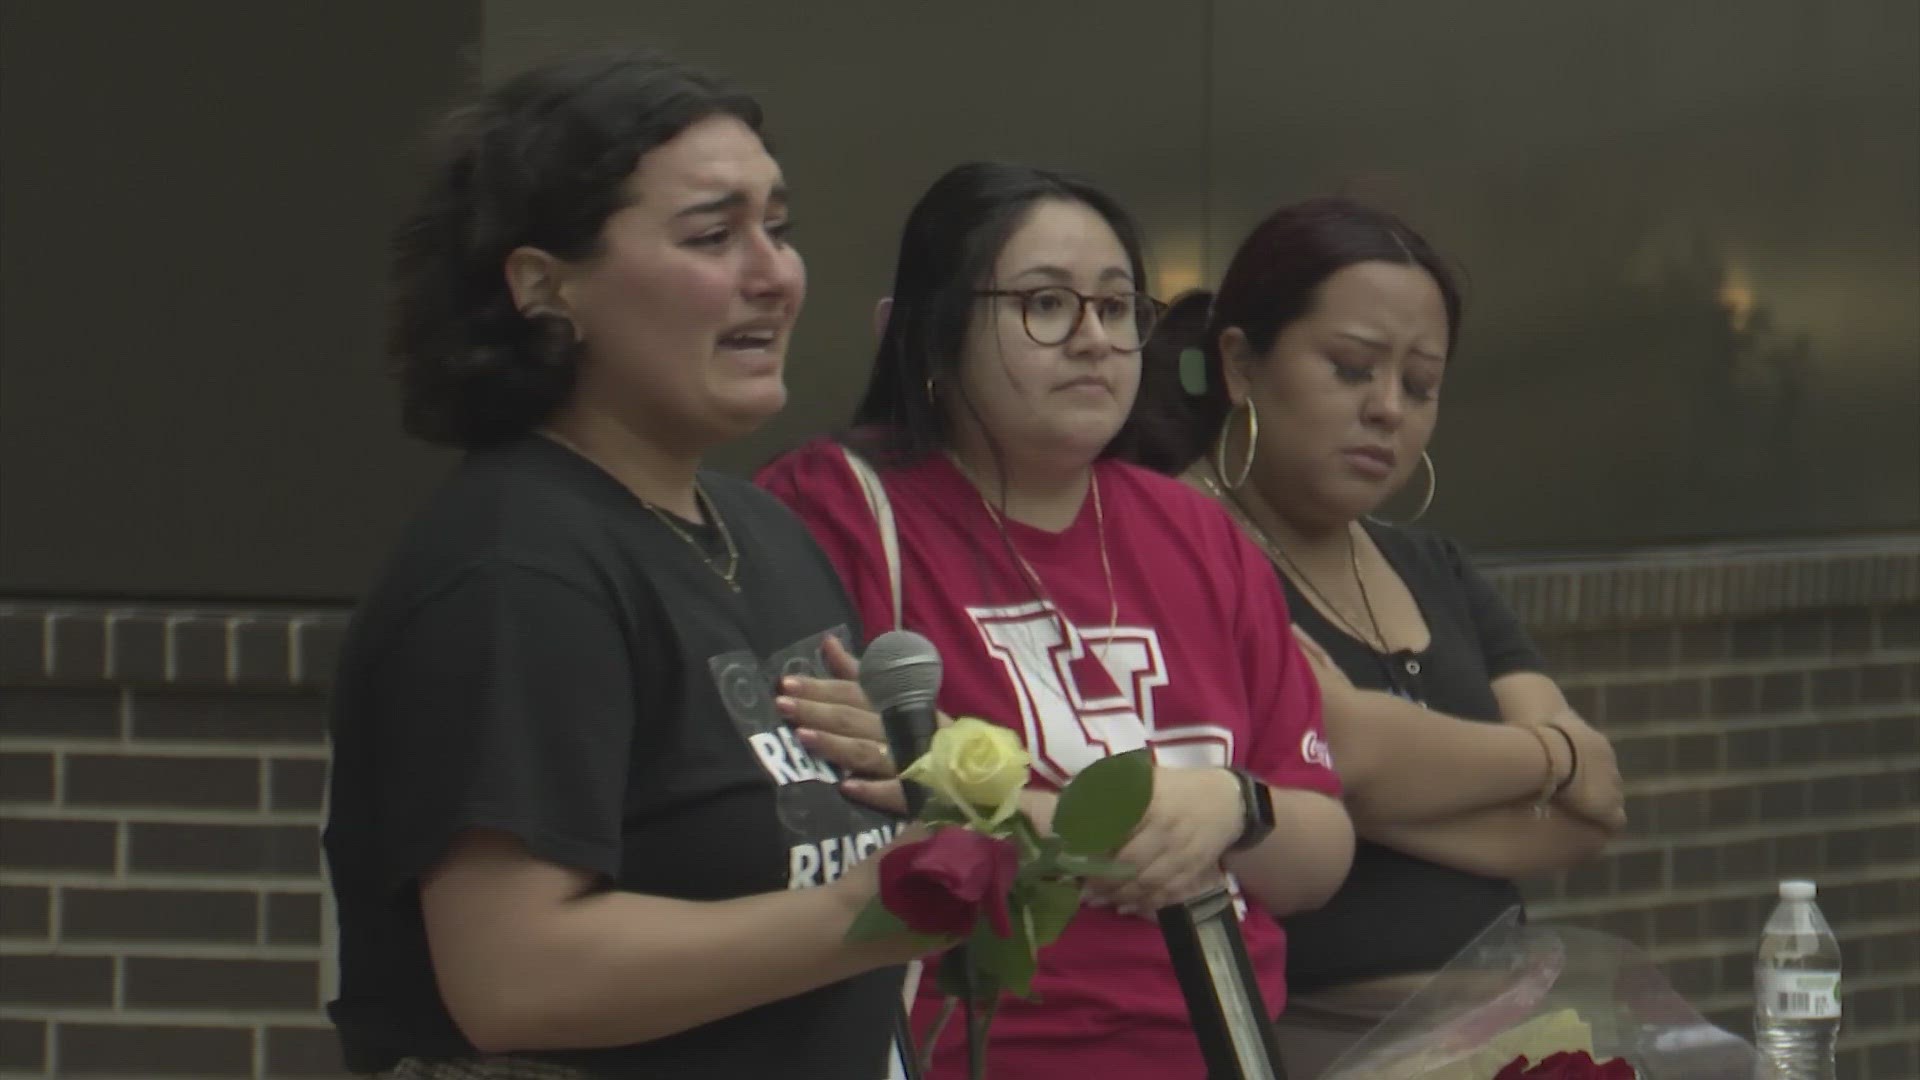 Tyler Medina’s family spoke at a vigil held Thursday night. His sisters remembered him as a sweet teen who took every opportunity to brighten someone's day.